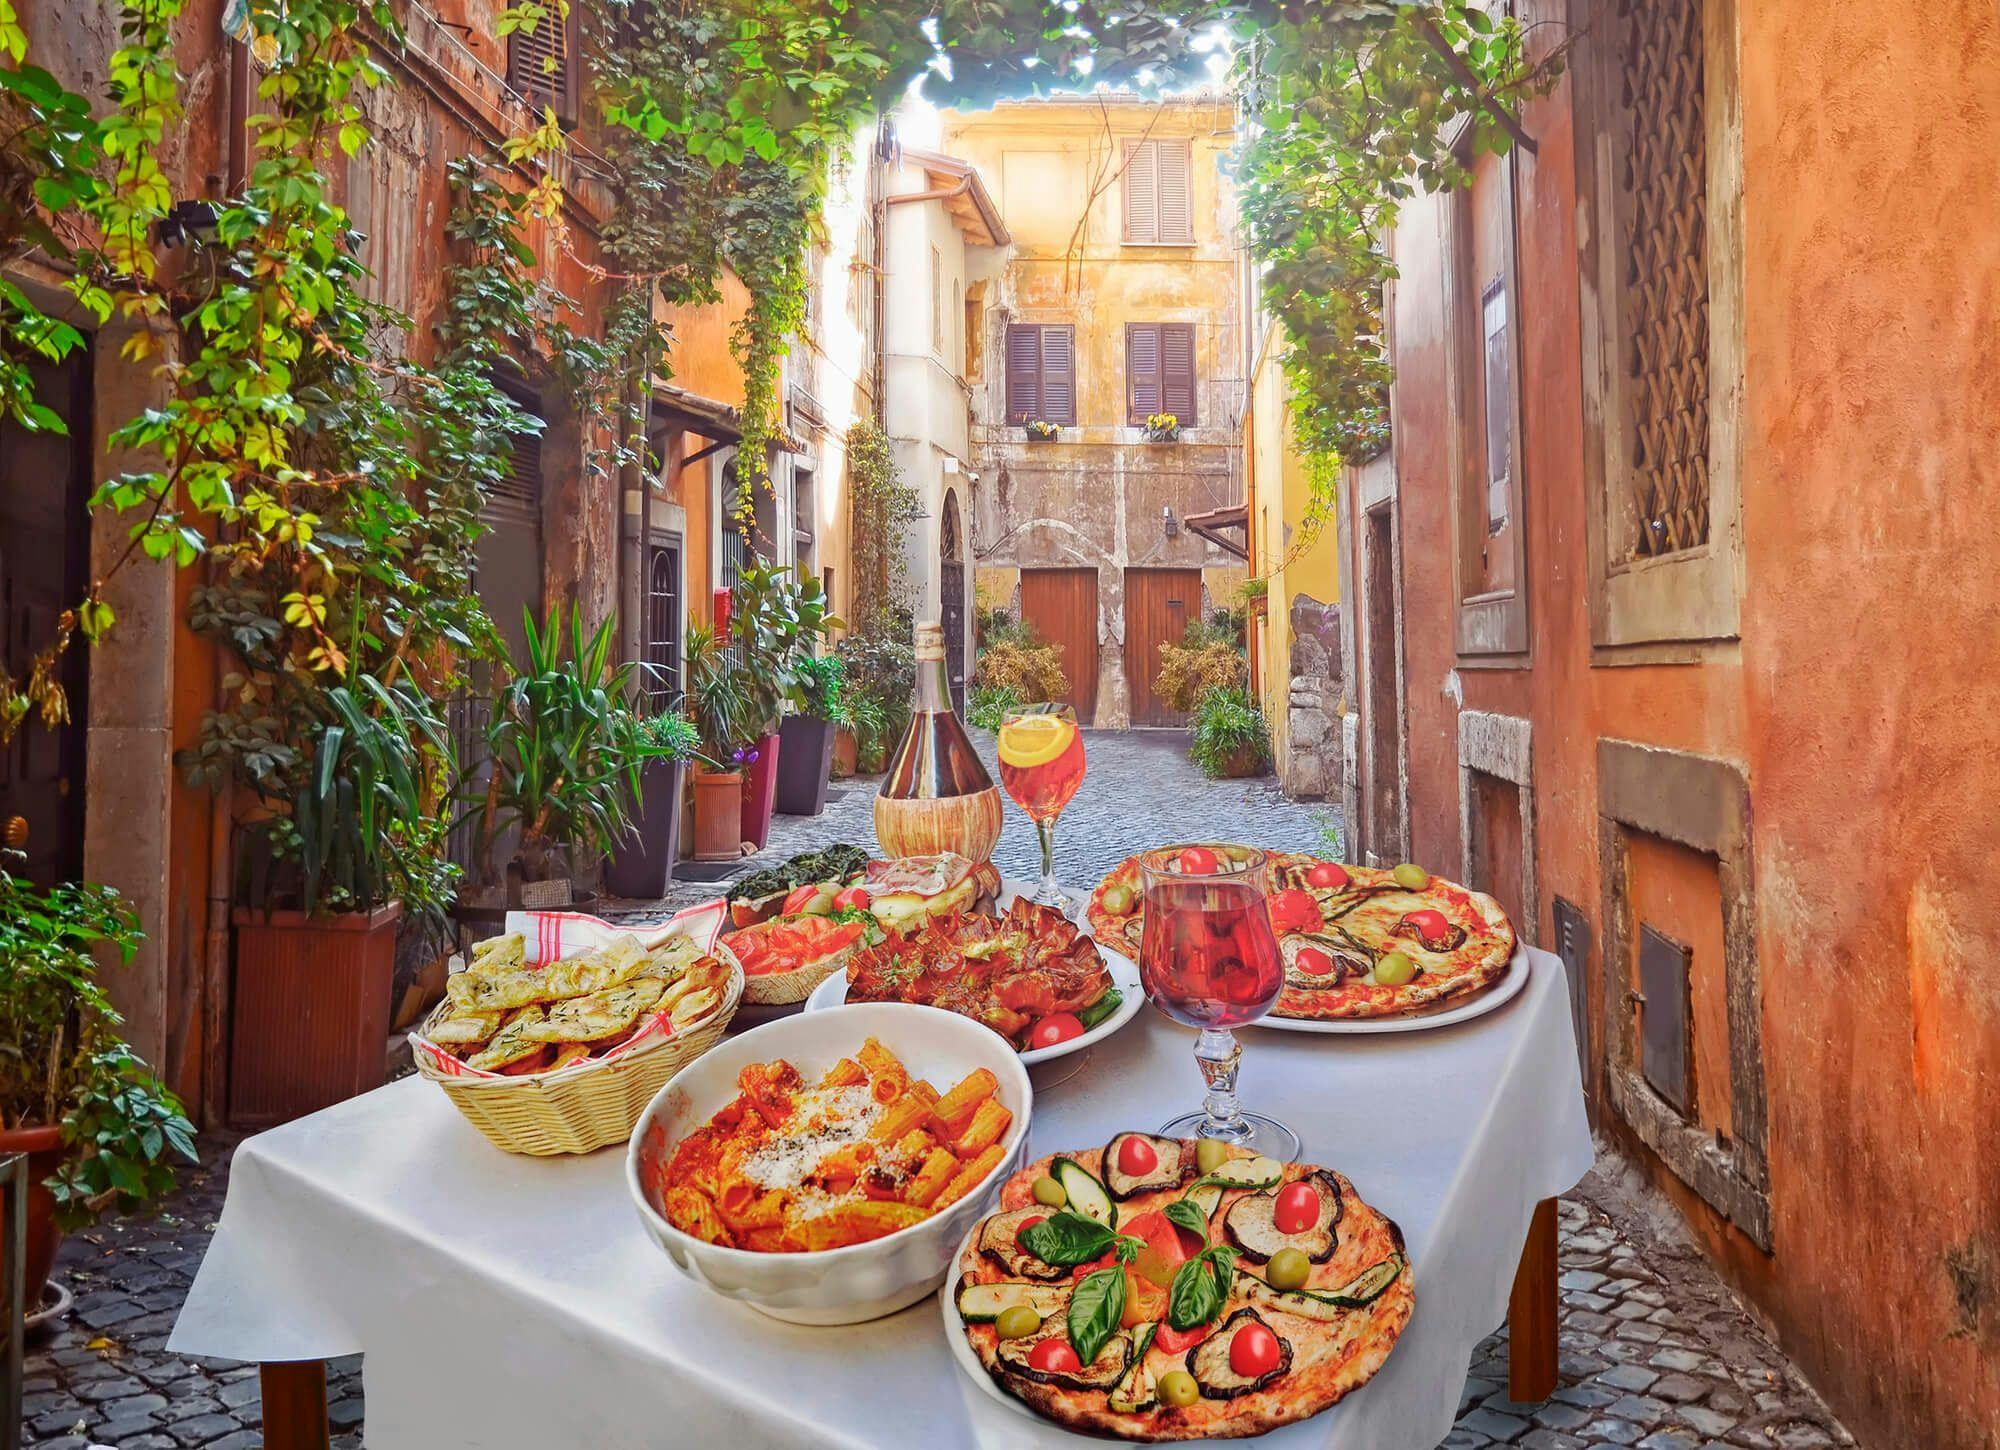 A table in an Italian street laid with dishes including pasta, pizza, and salad